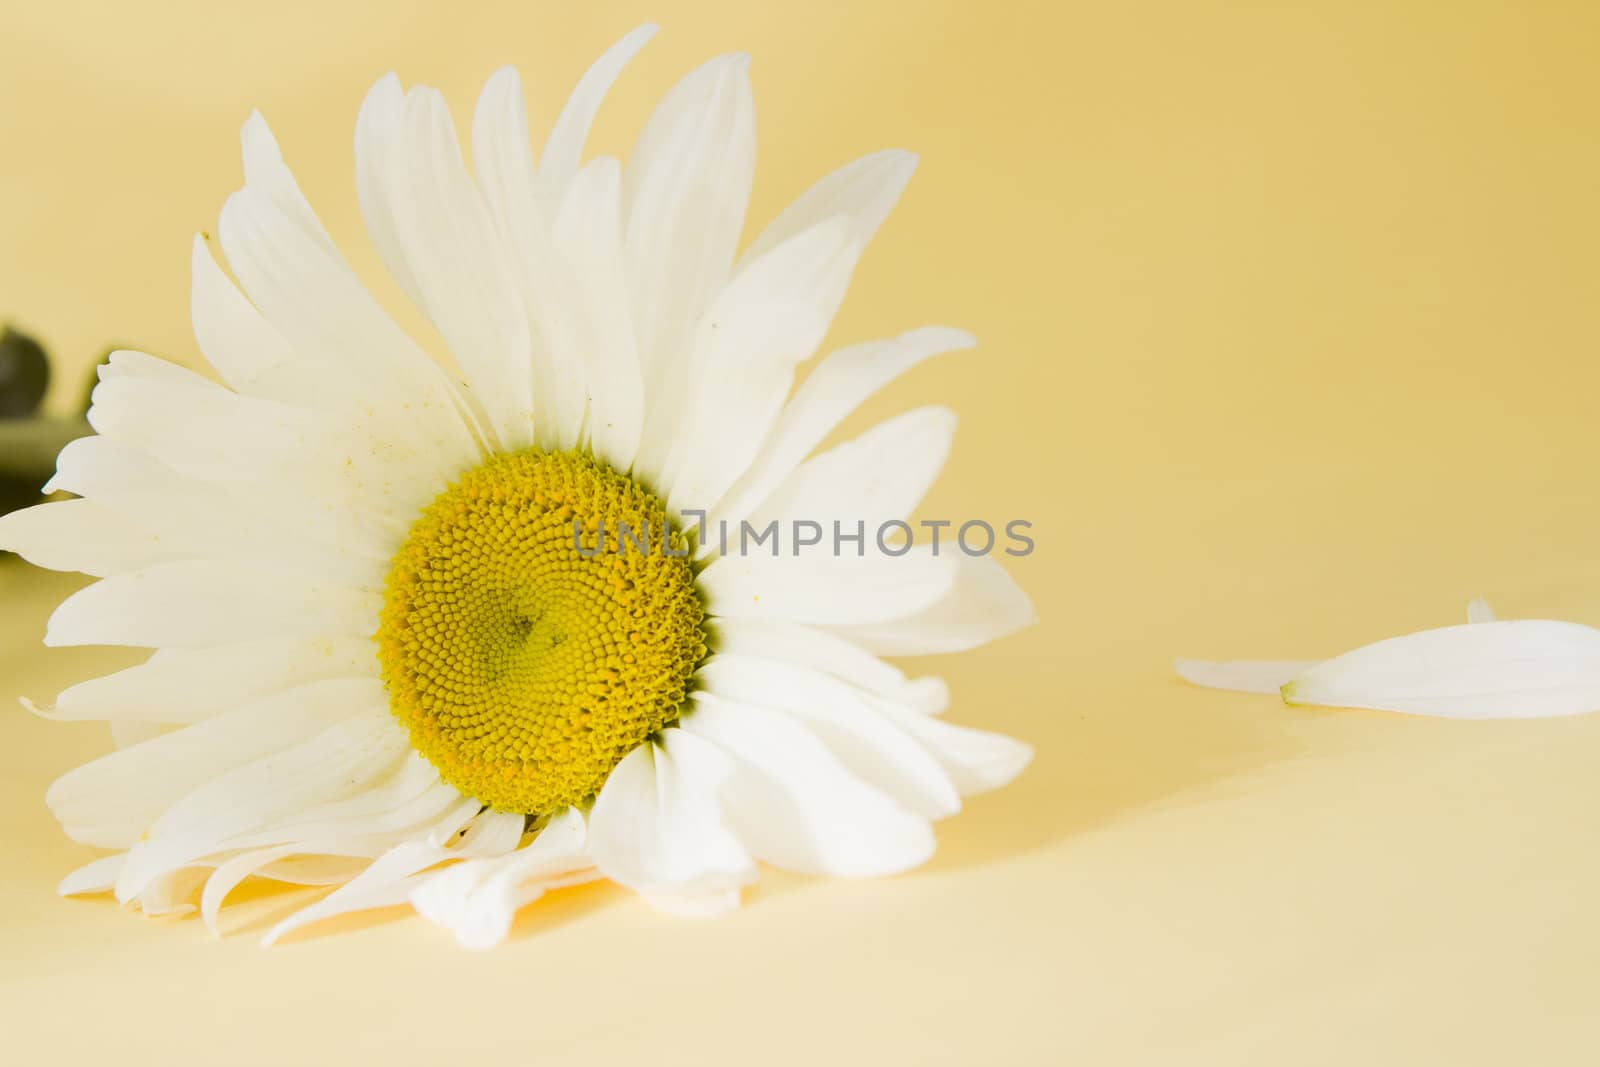 flower isolated